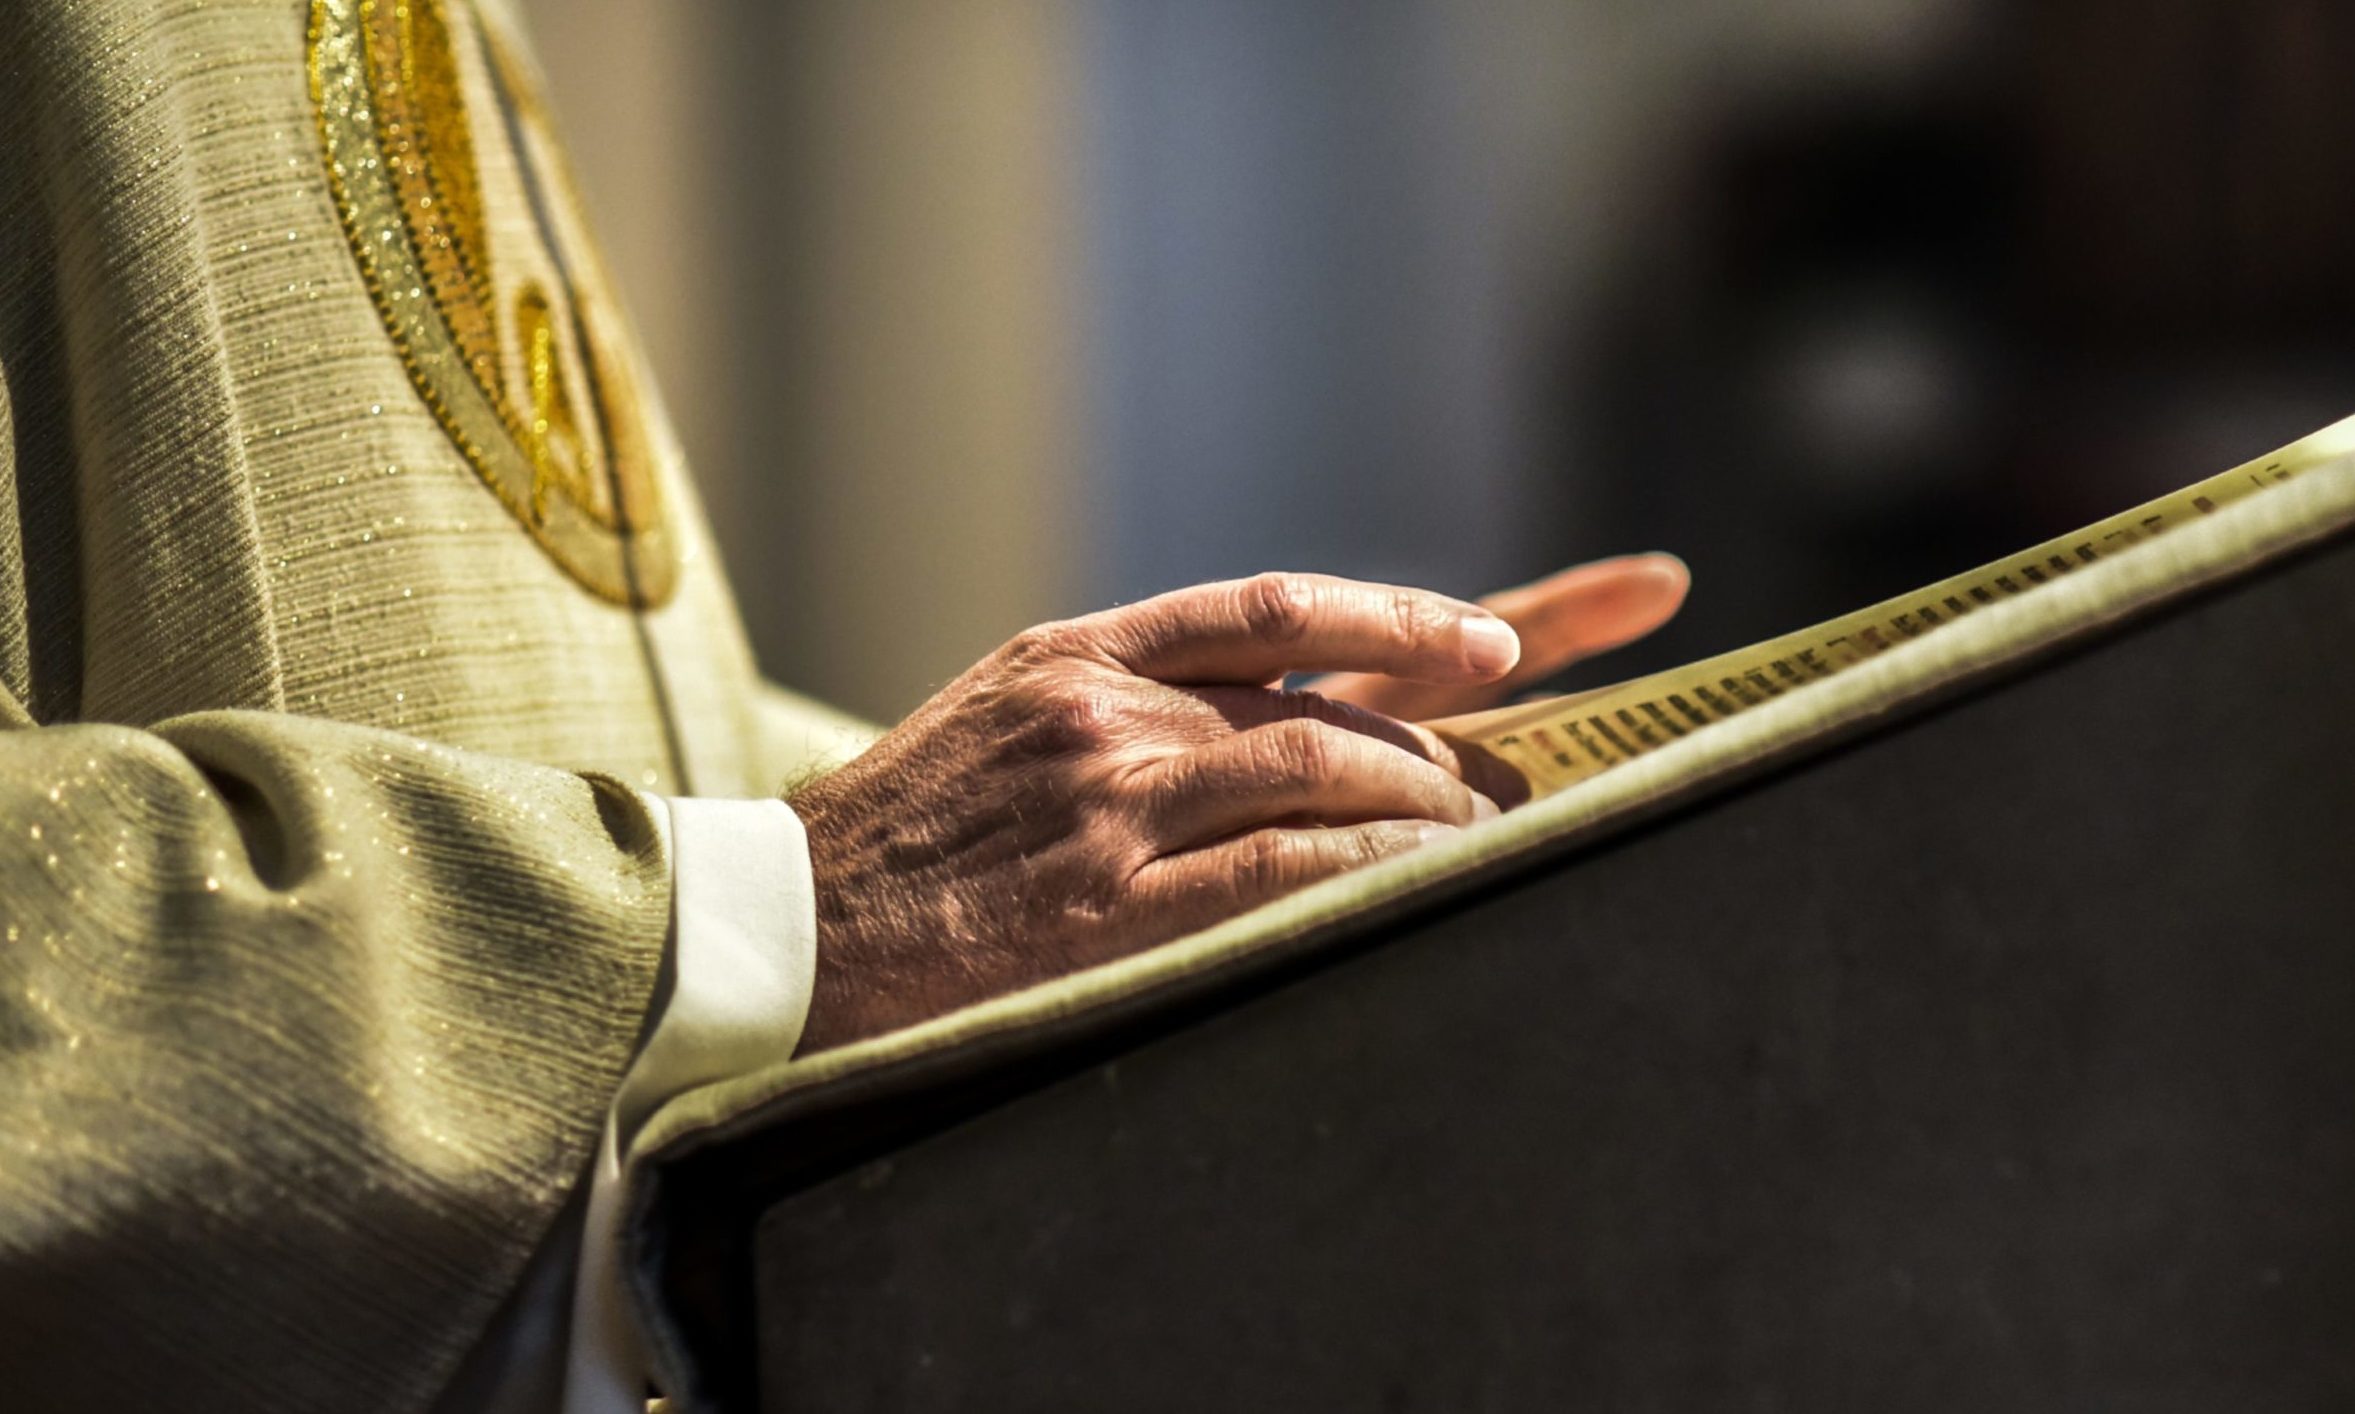 The hands of a catholic priest reading a bible.